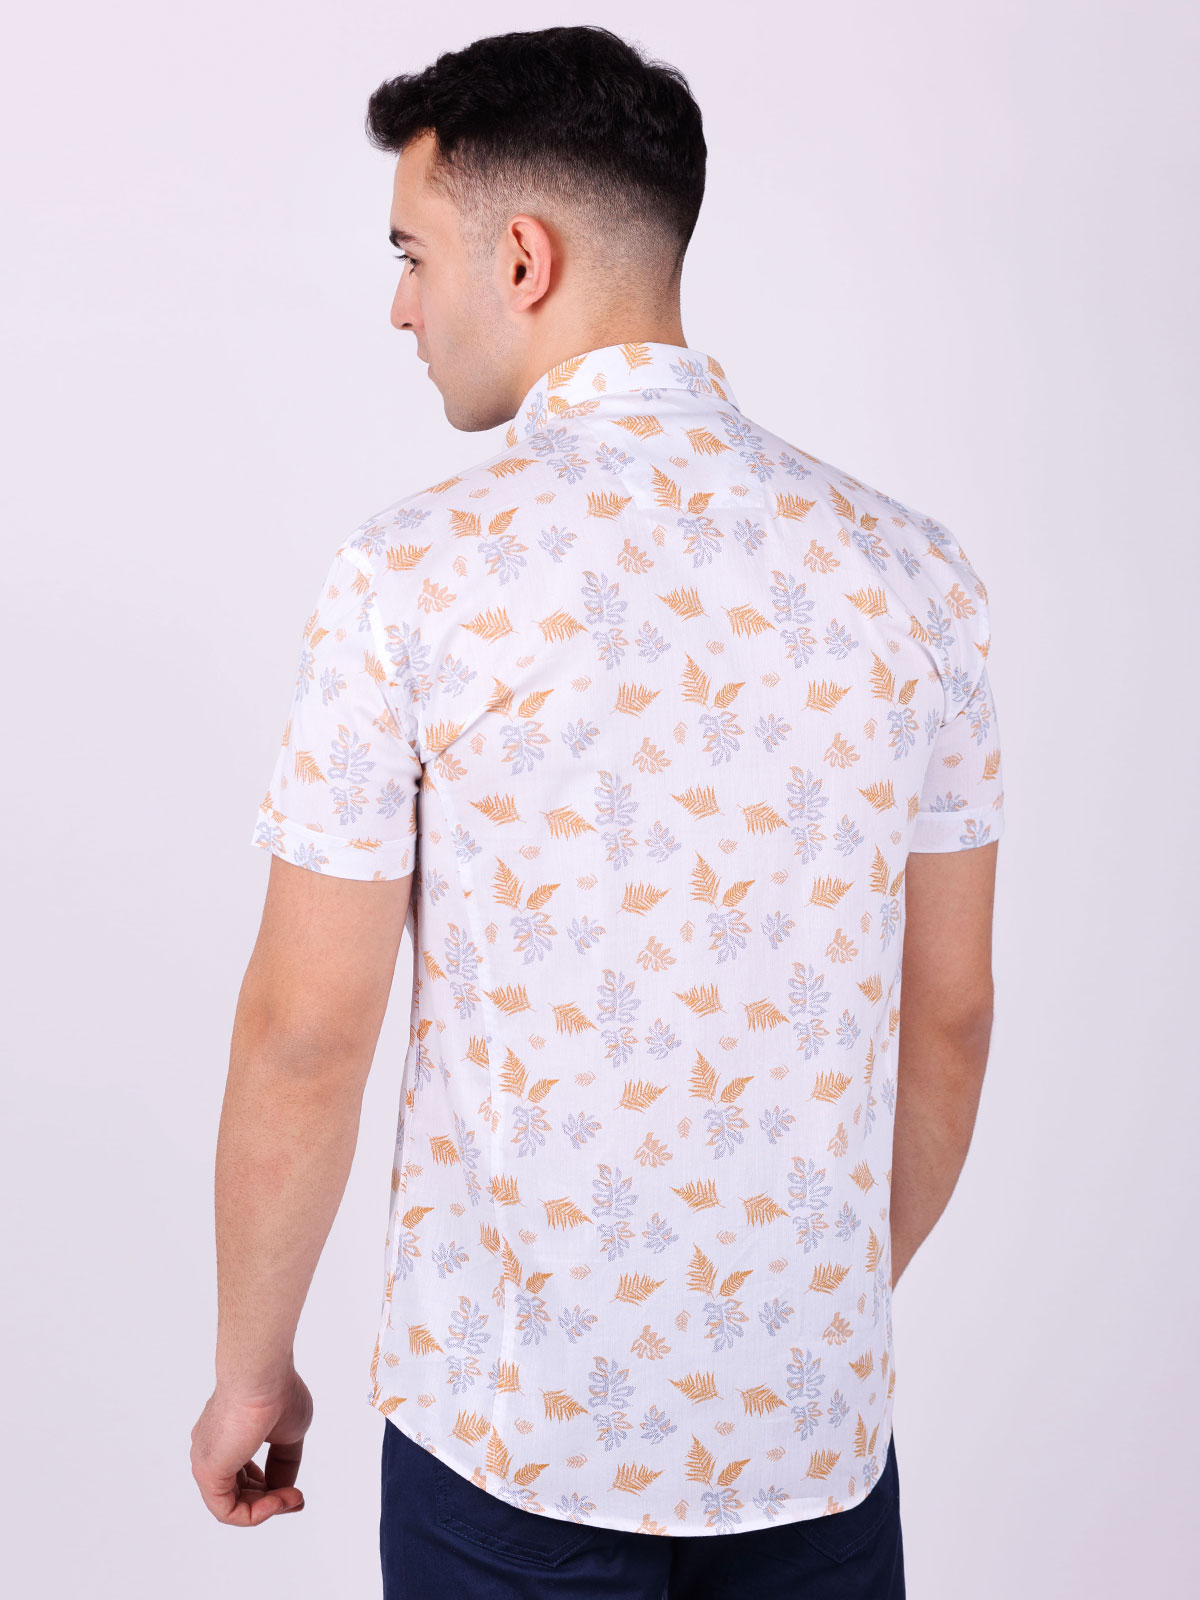 Shirt with leaf and twig print - 80232 € 40.49 img4